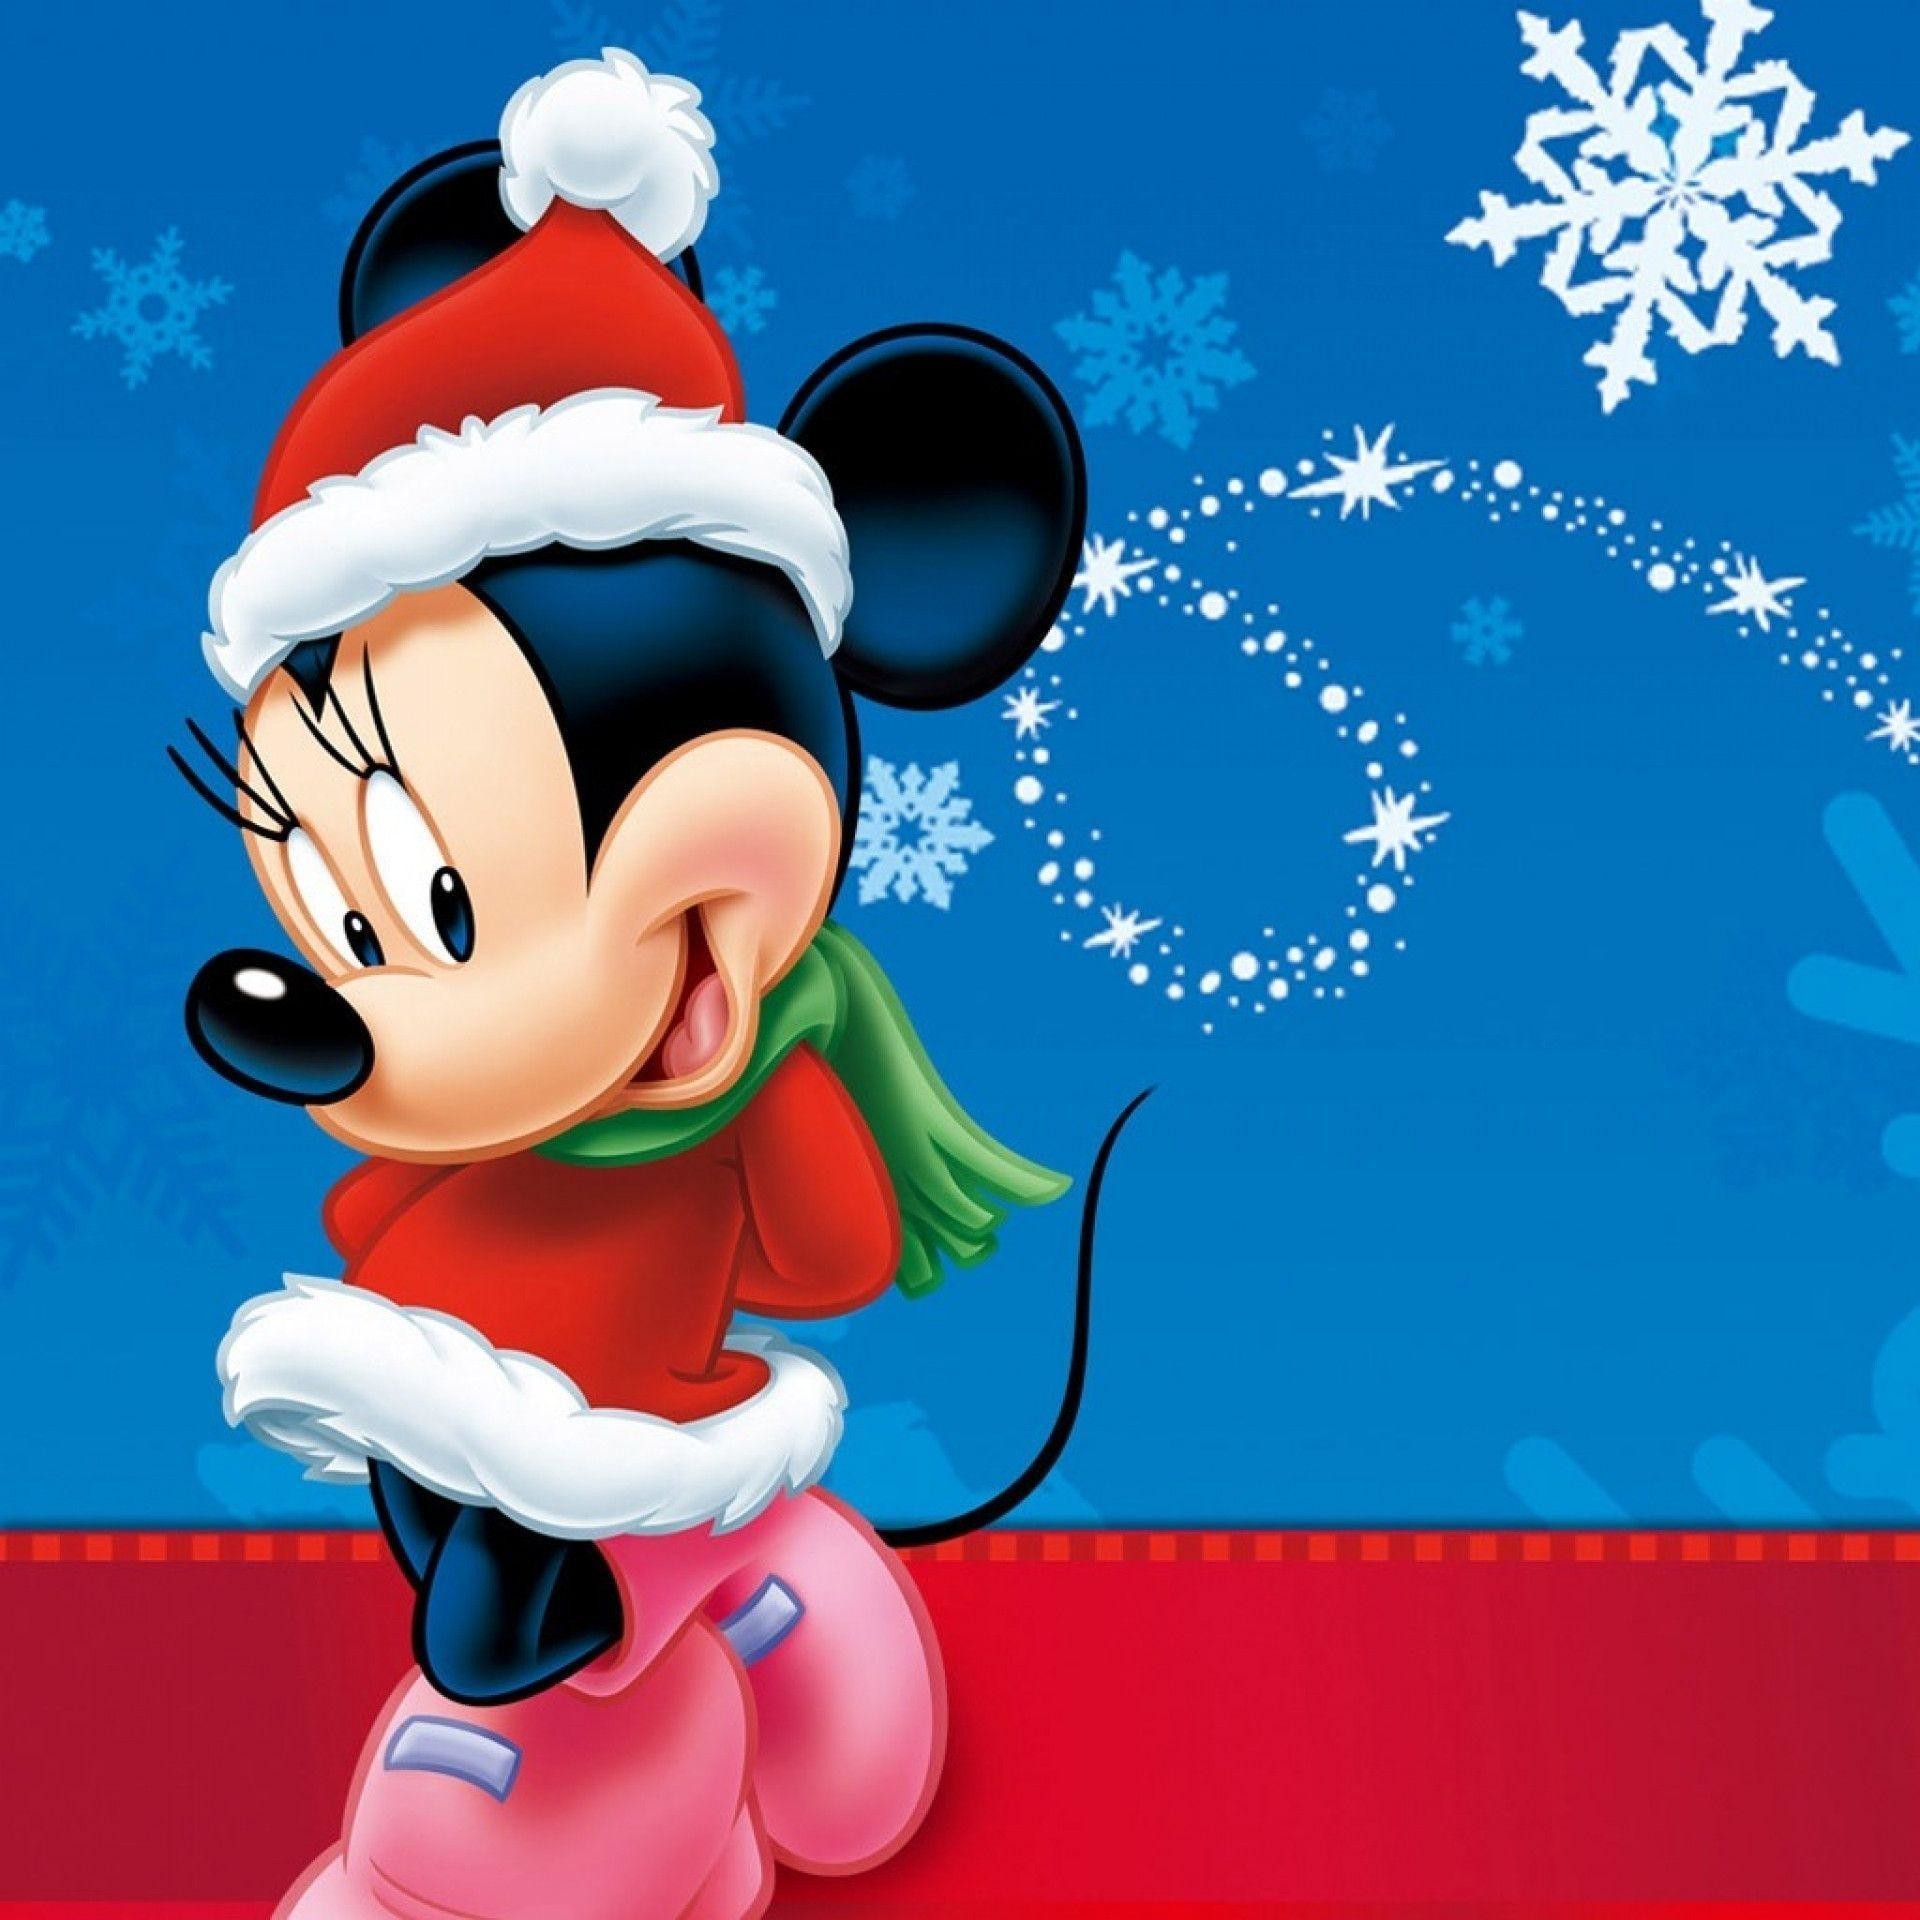 Mickey Mouse Live Wallpaper Download - Minnie Mouse In Christmas - HD Wallpaper 